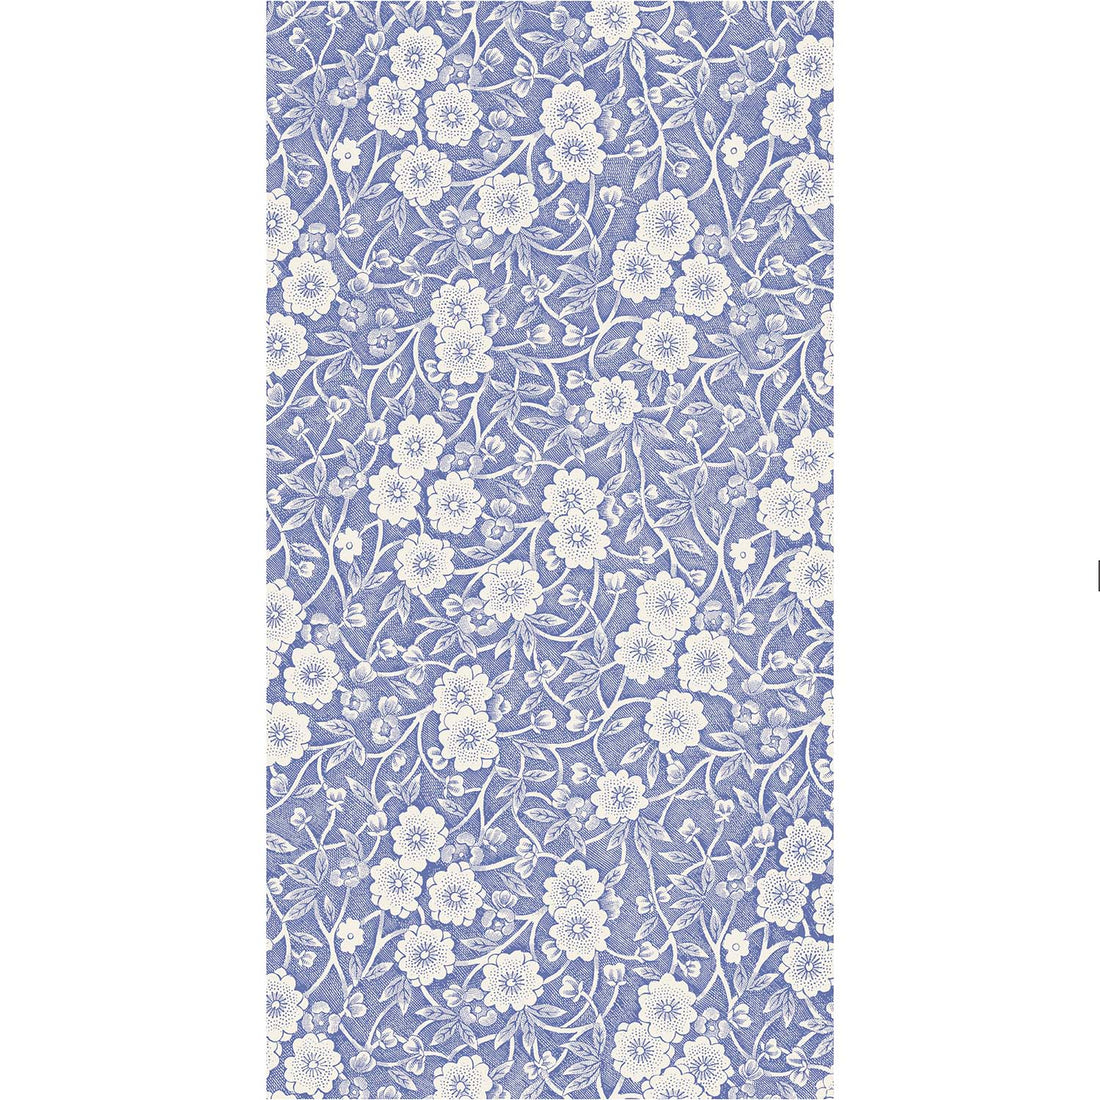 A rectangle guest napkin featuring a dense pattern of white flowers, stems and leaves on a medium blue background.